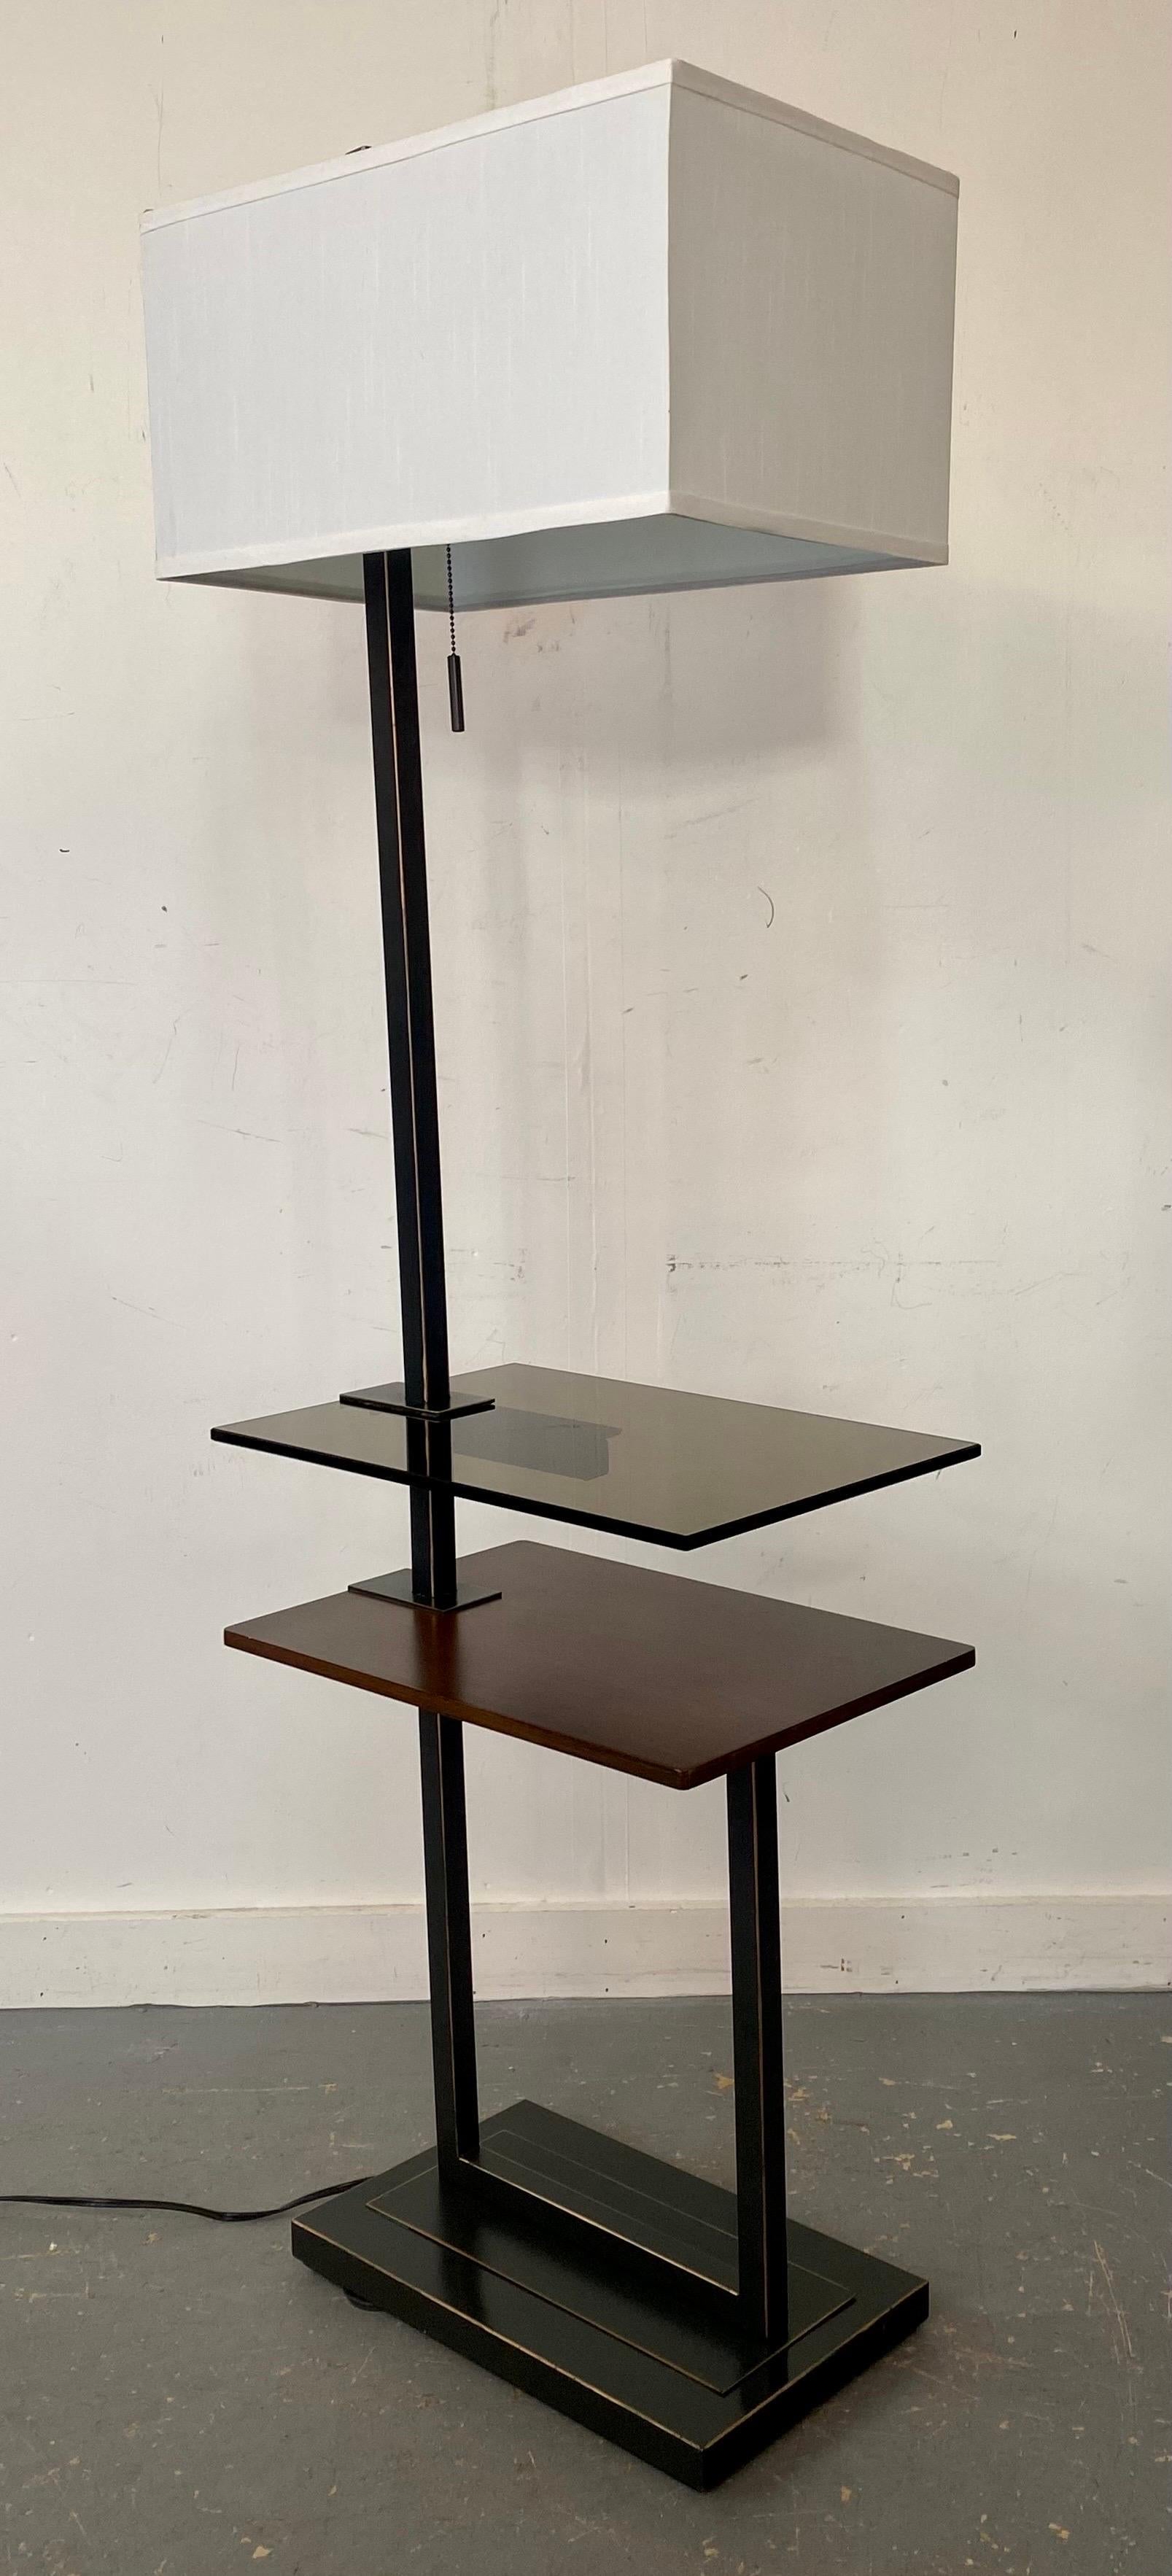 A quality Mid-Century Modern two-tier table floor lamp. The Black framed floor lamp features a rectangular base holding one cherry wood table / tray. The second shelf / tray is made of thick fiberglass tinted in brown to match the wooden table. The